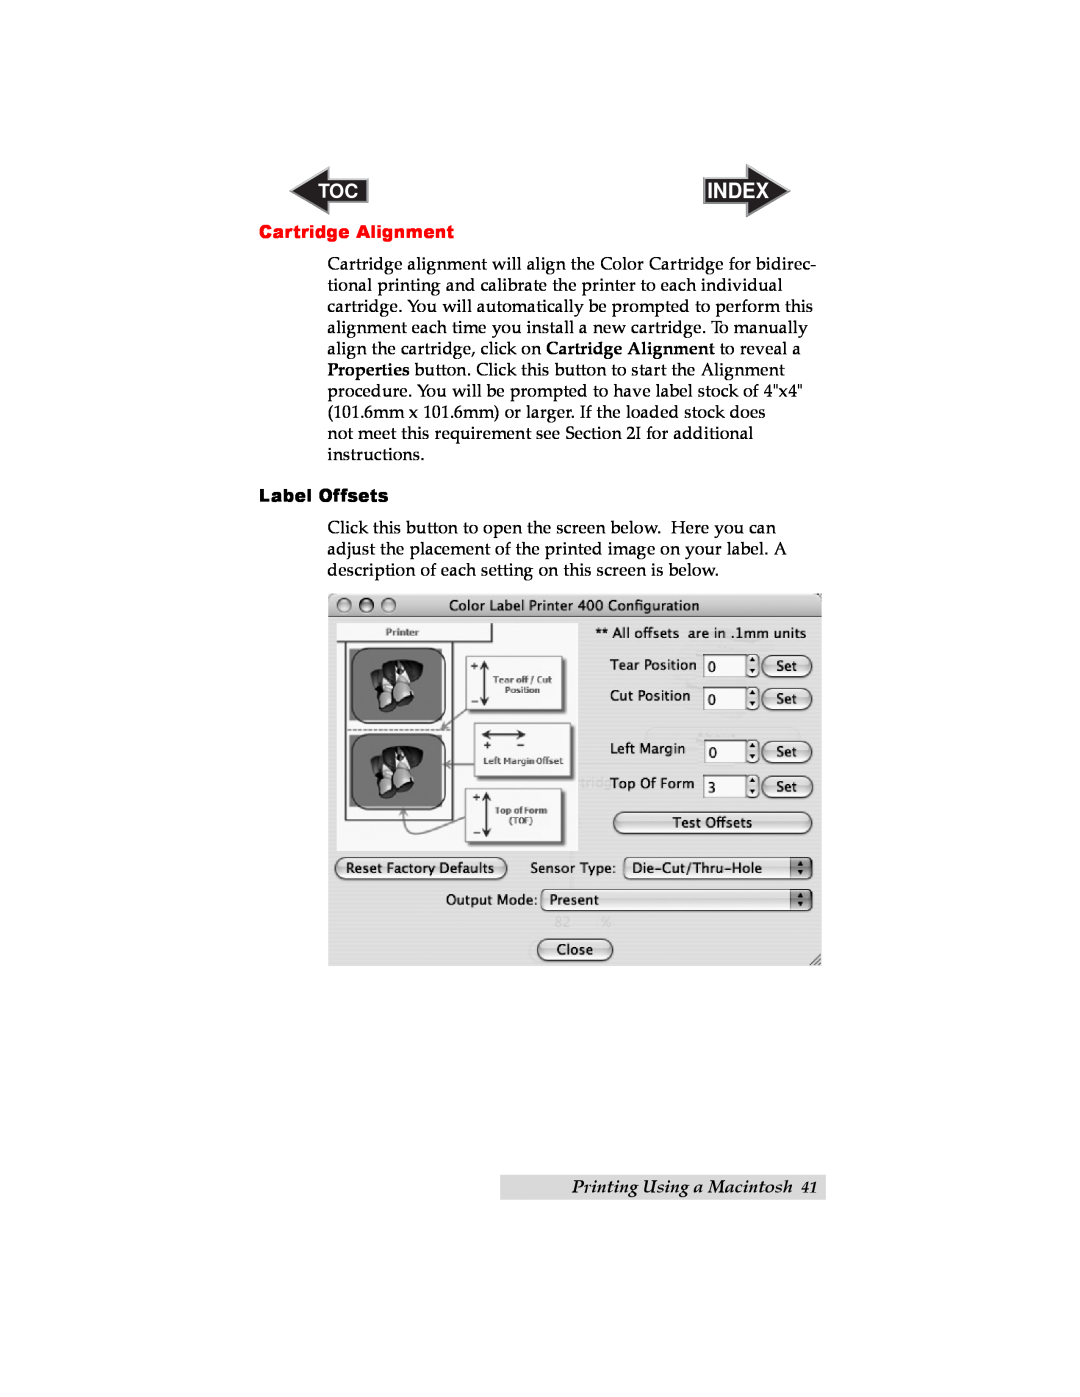 Primera Technology LX400 user manual Label Offsets, Index, Cartridge Alignment, Printing Using a Macintosh 